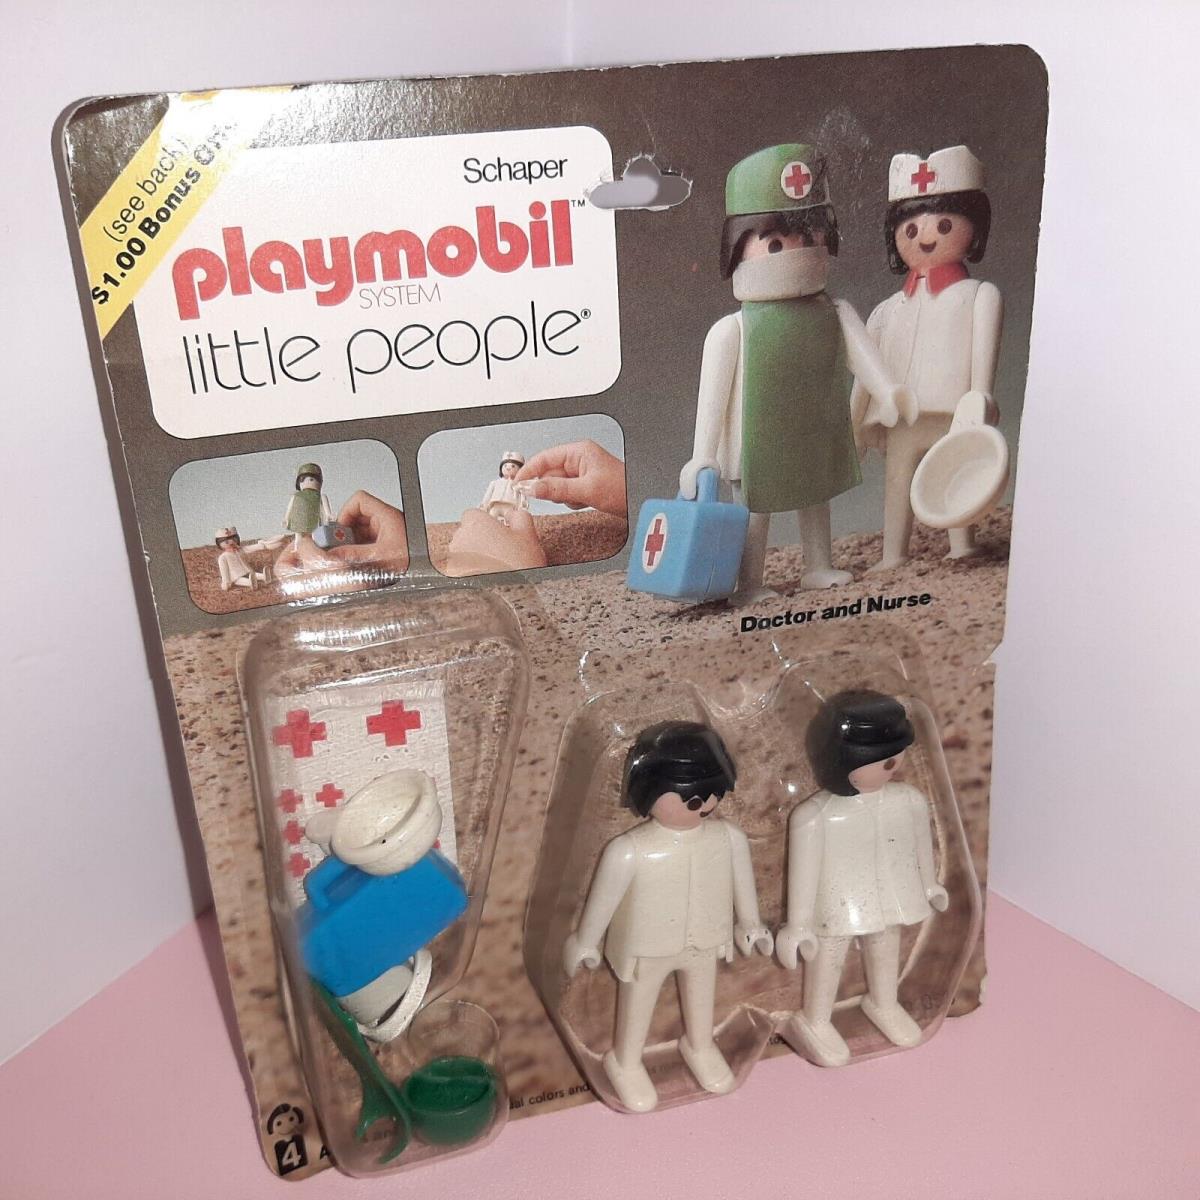 Playmobil Little People Rare Vintage Doctor and Nurse 1977 By Schaper